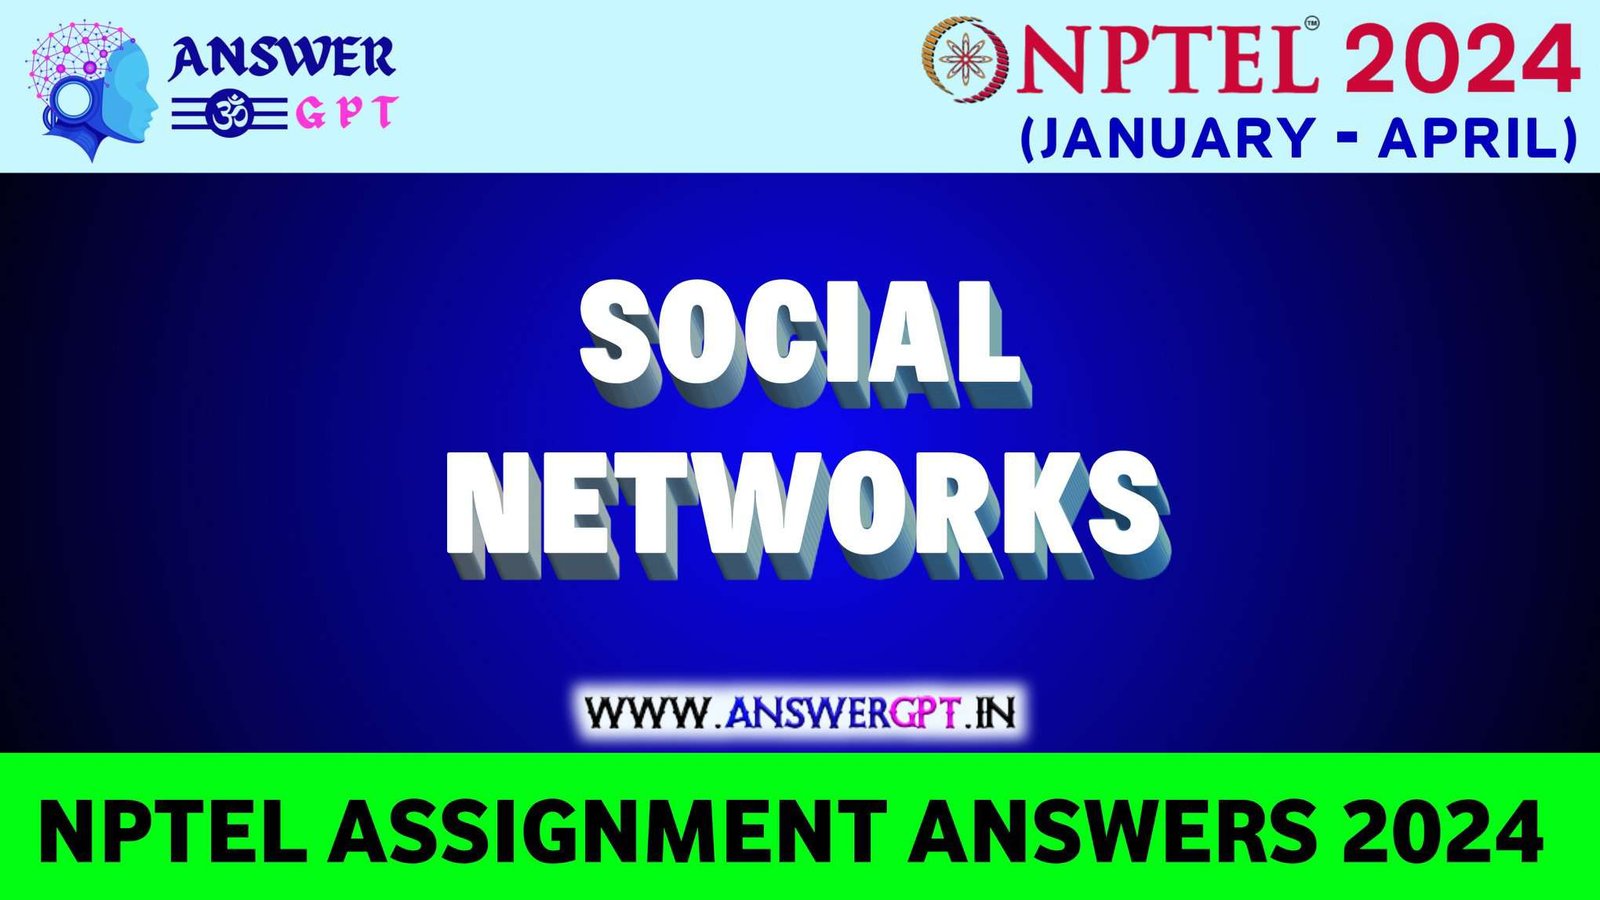 nptel introduction to machine learning assignment answers week 3 2023